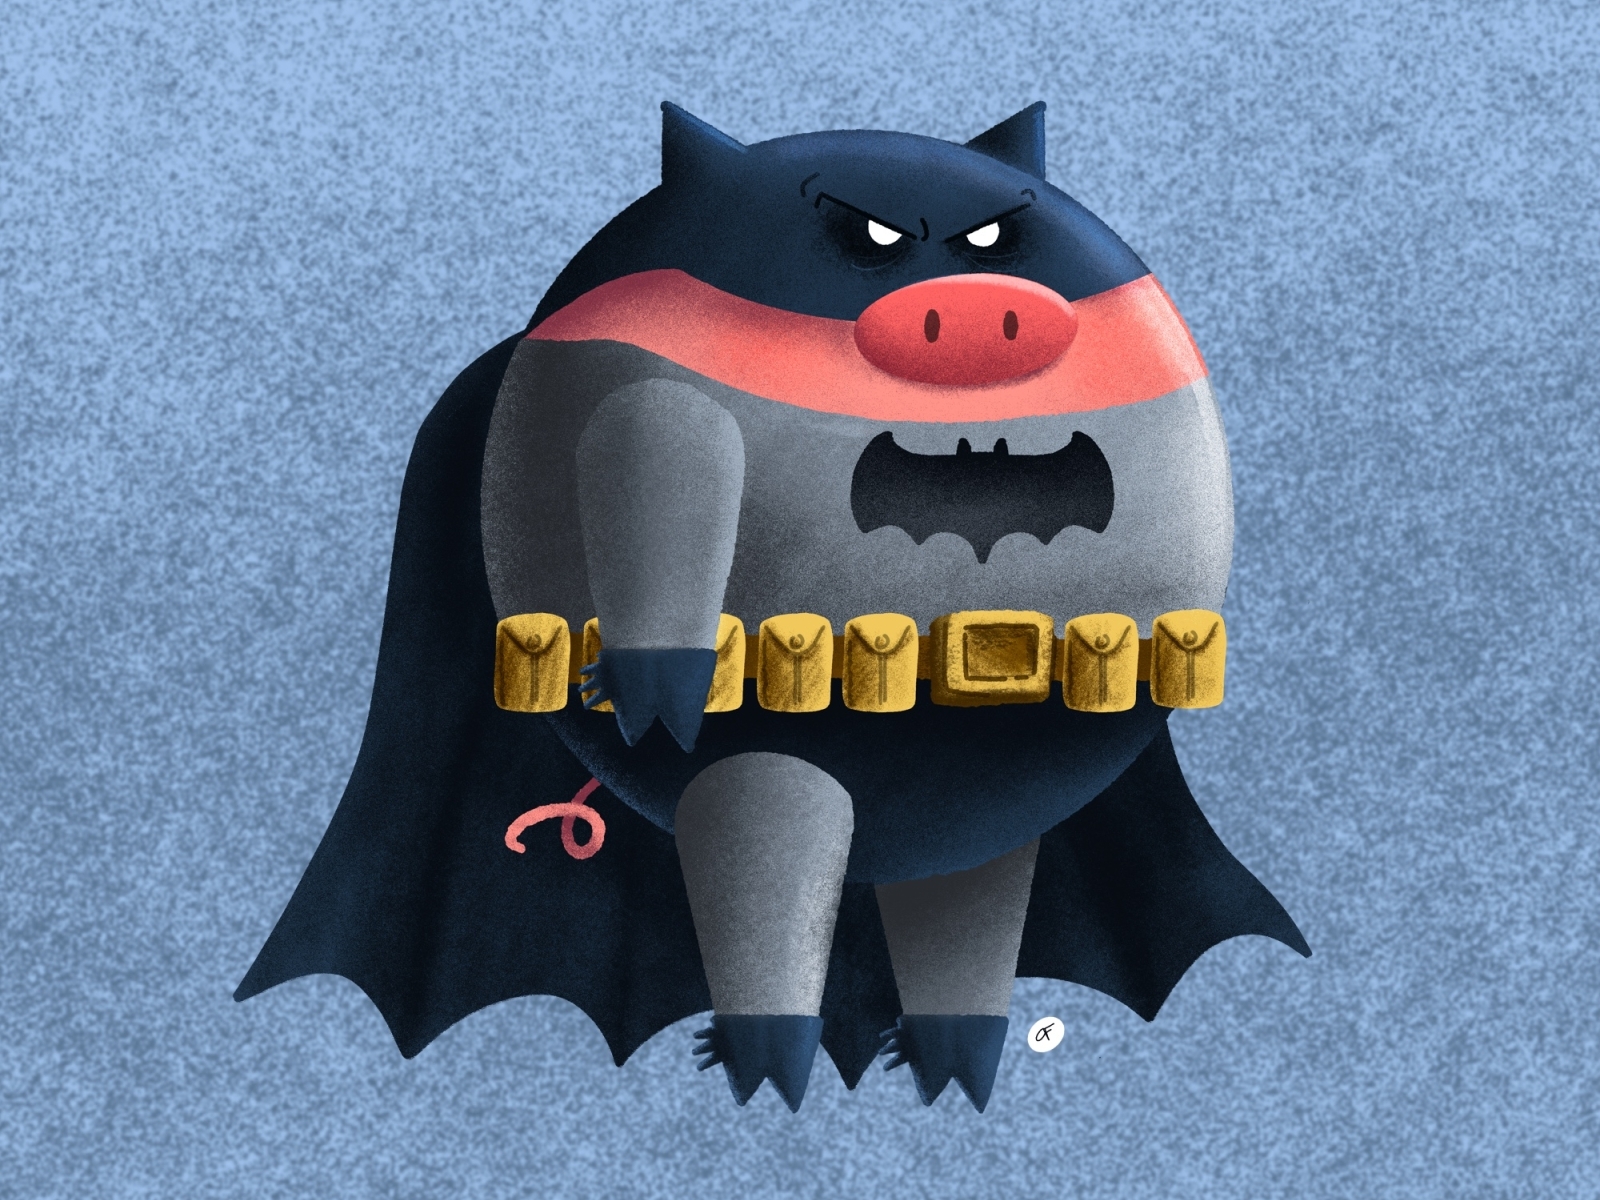 BATPIG by Christian Flores on Dribbble